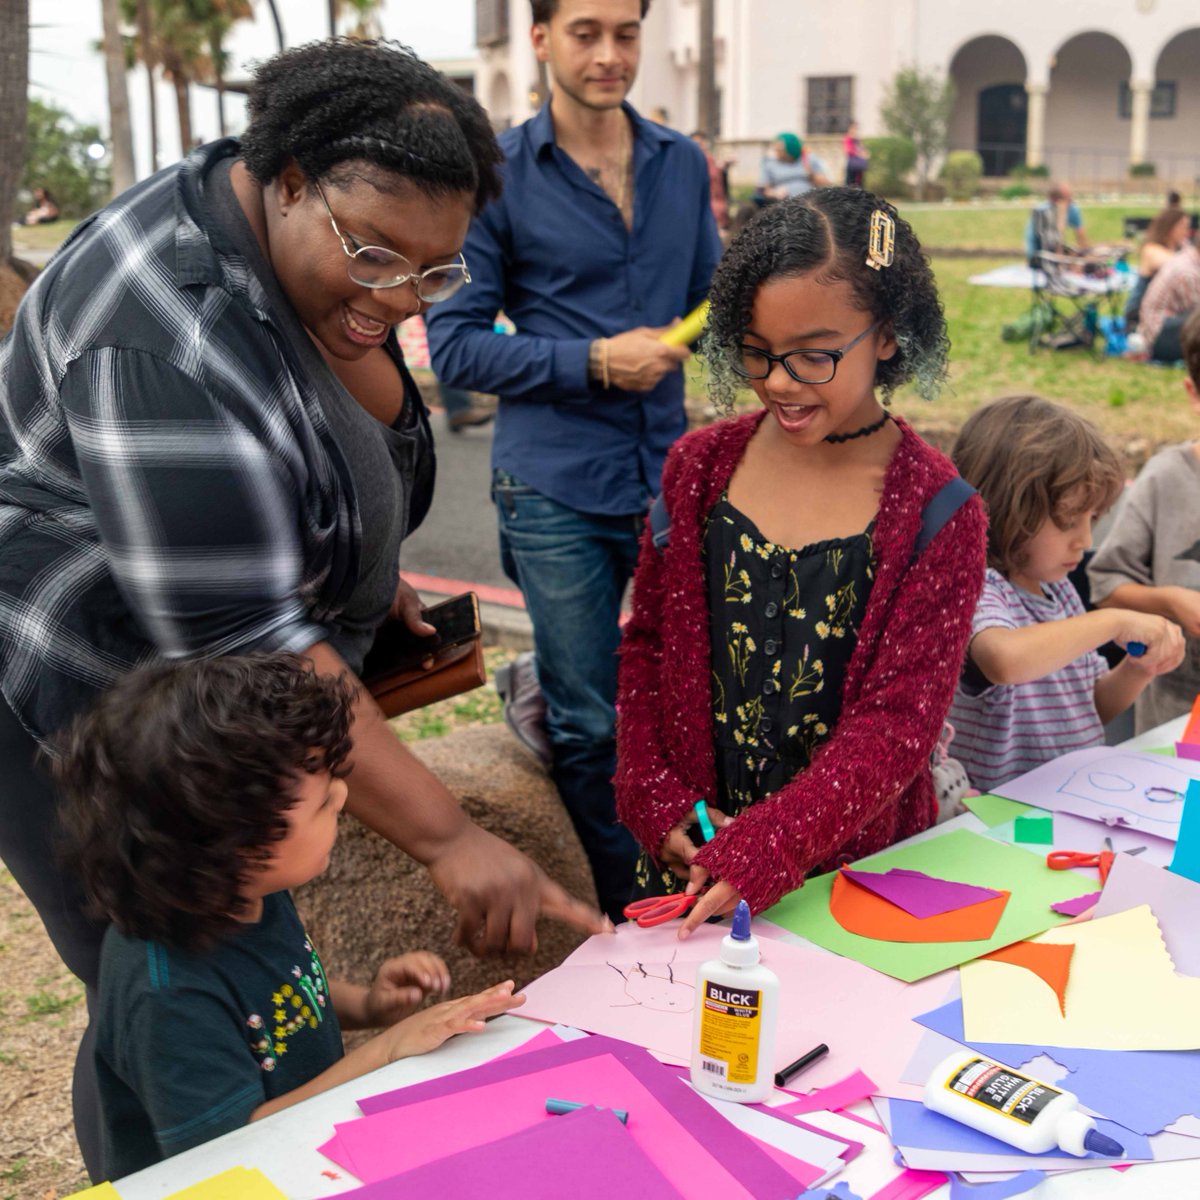 Second Thursday is TODAY! 🎉 Join us for a Fiesta-filled evening of music, art, food, and fun from 6-9 p.m. Admission is free, thanks to @heb. Register here: mcnayart.org/second-thursday See you soon! #McNayArtMuseum #SanAntonio #VivaFiesta